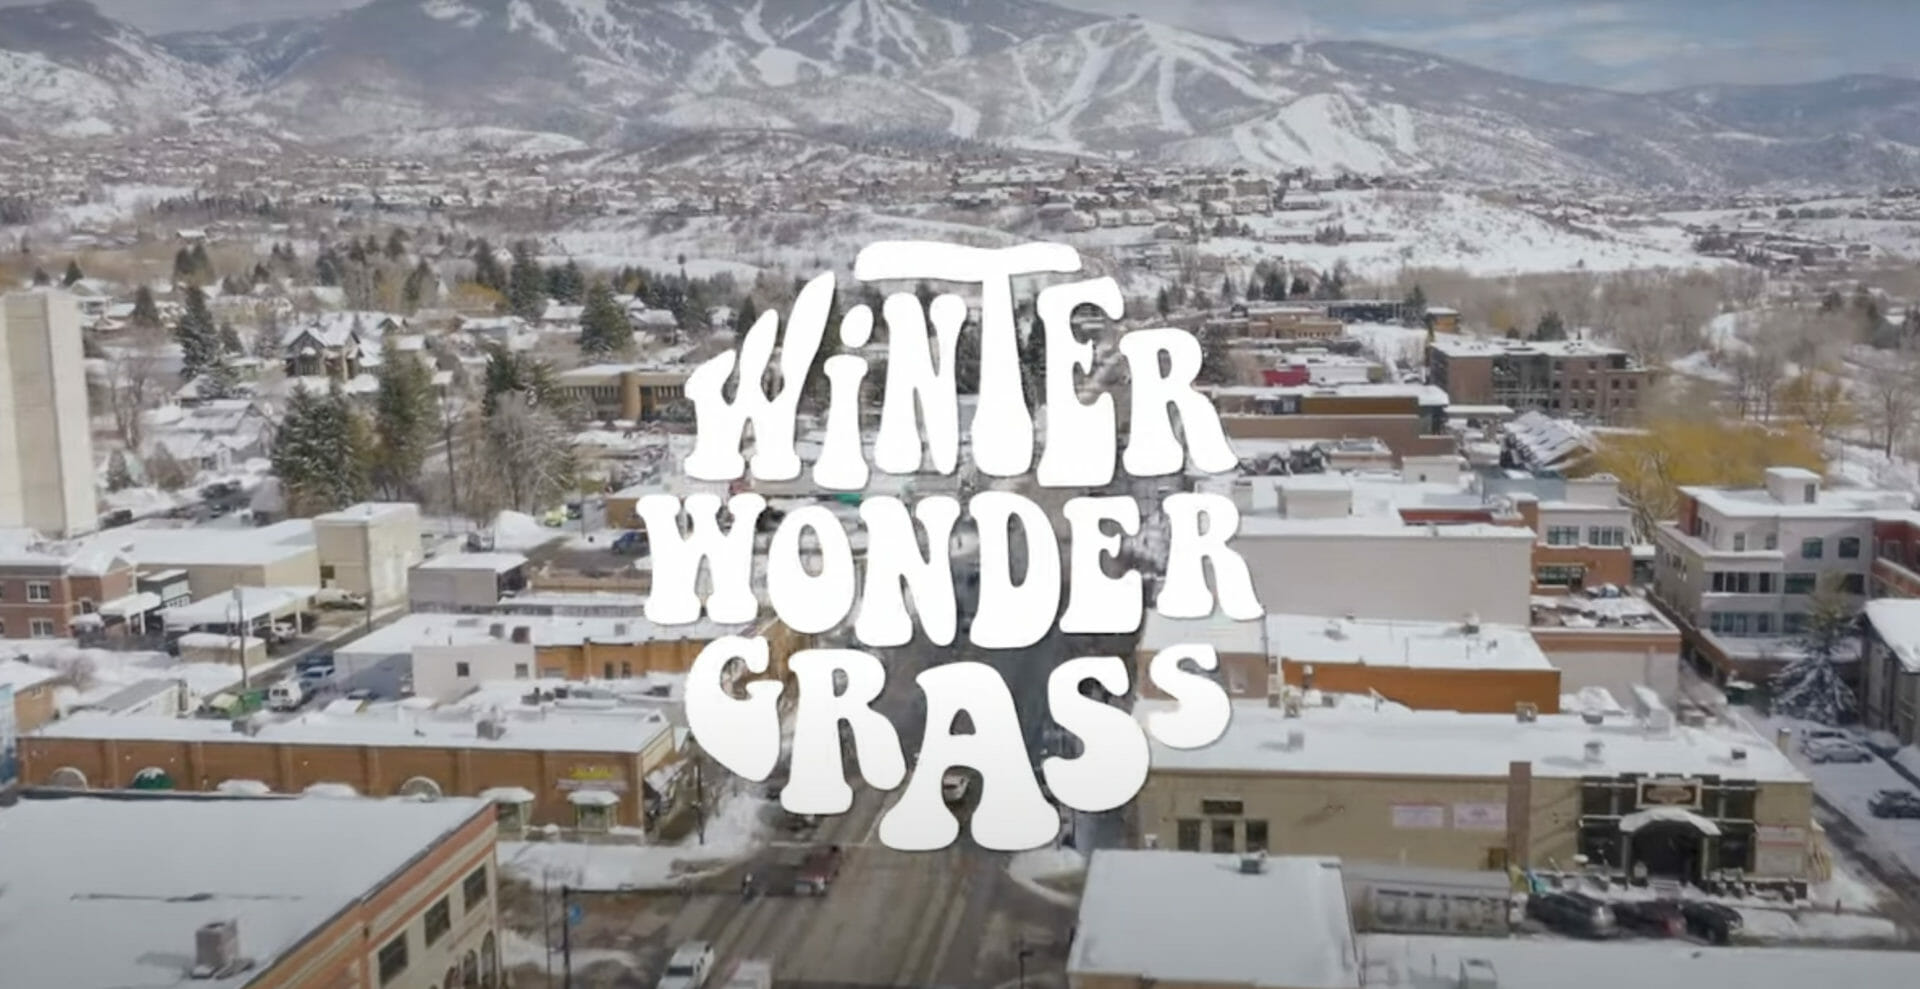 WinterWonderGrass Festival Shares Lineup for 10th Anniversary: Greensky Bluegrass, The Infamous Stringdusters, Leftover Salmon and More